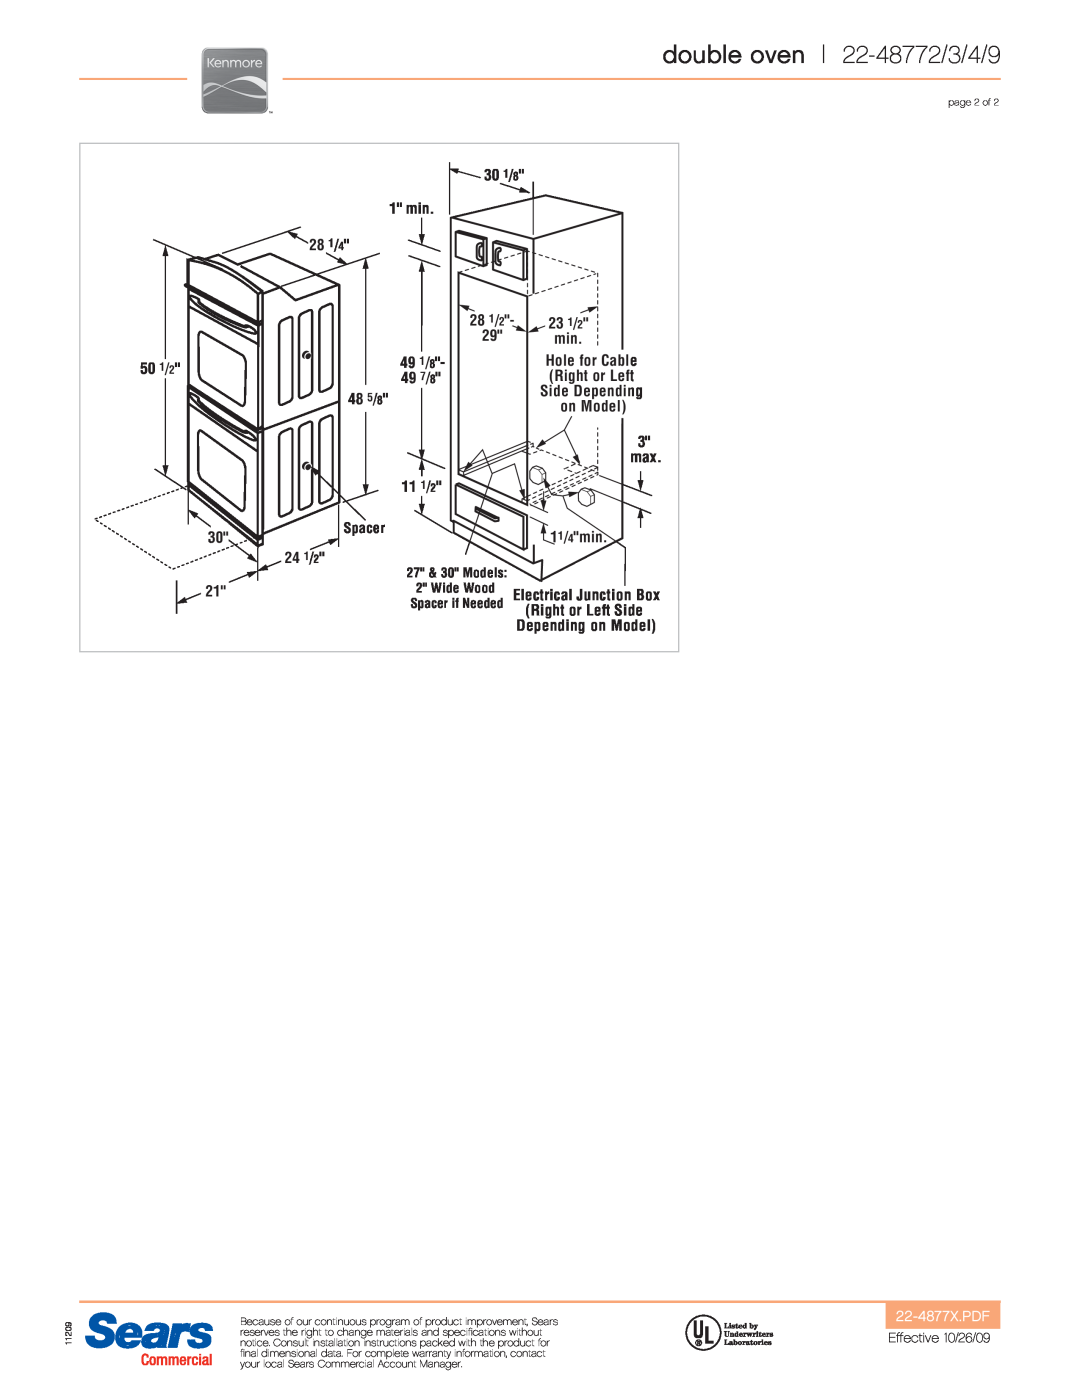 Kenmore 22-48839 double oven 22-48772/3/4/9, 22-4877X.PDF, Right or Left, Depending on Model, Effective 10/26/09 